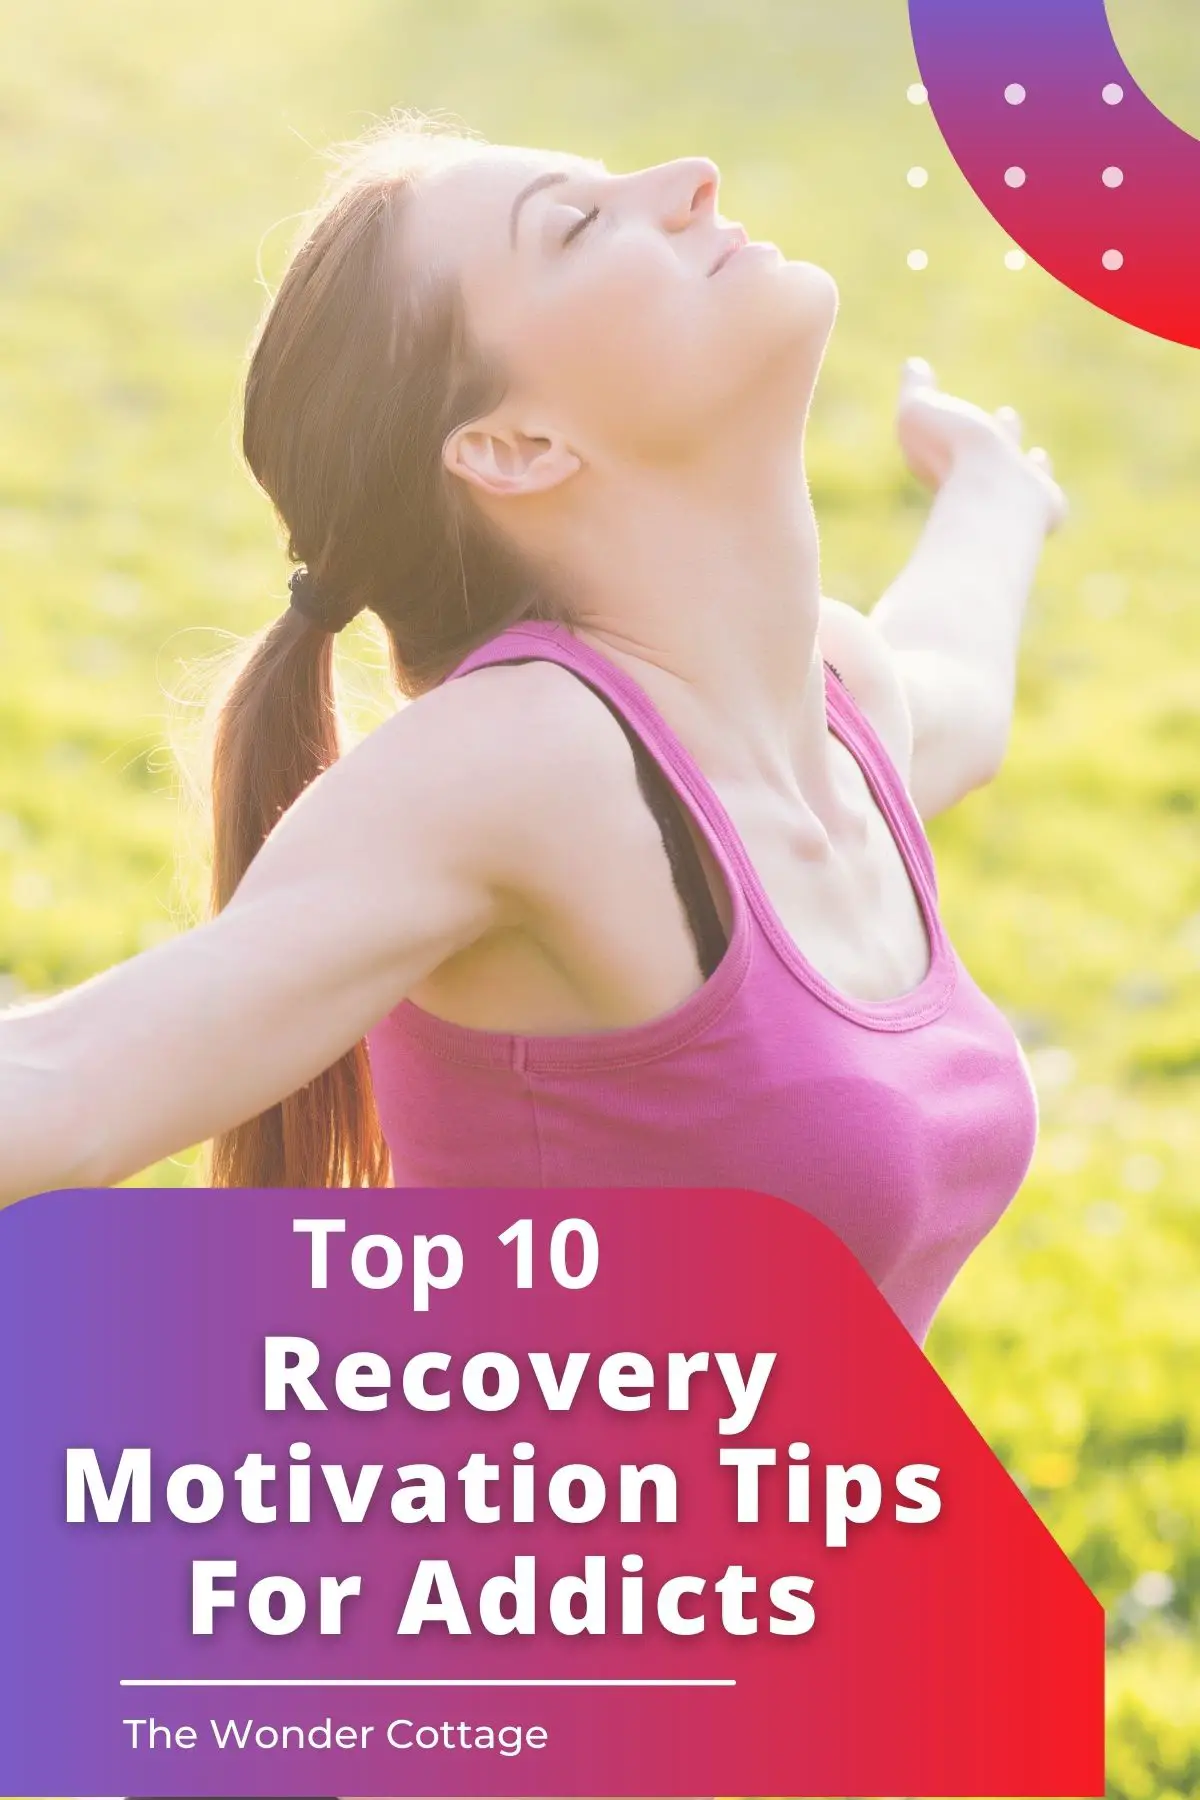 Top 10 Recovery Motivation Tips For Addicts